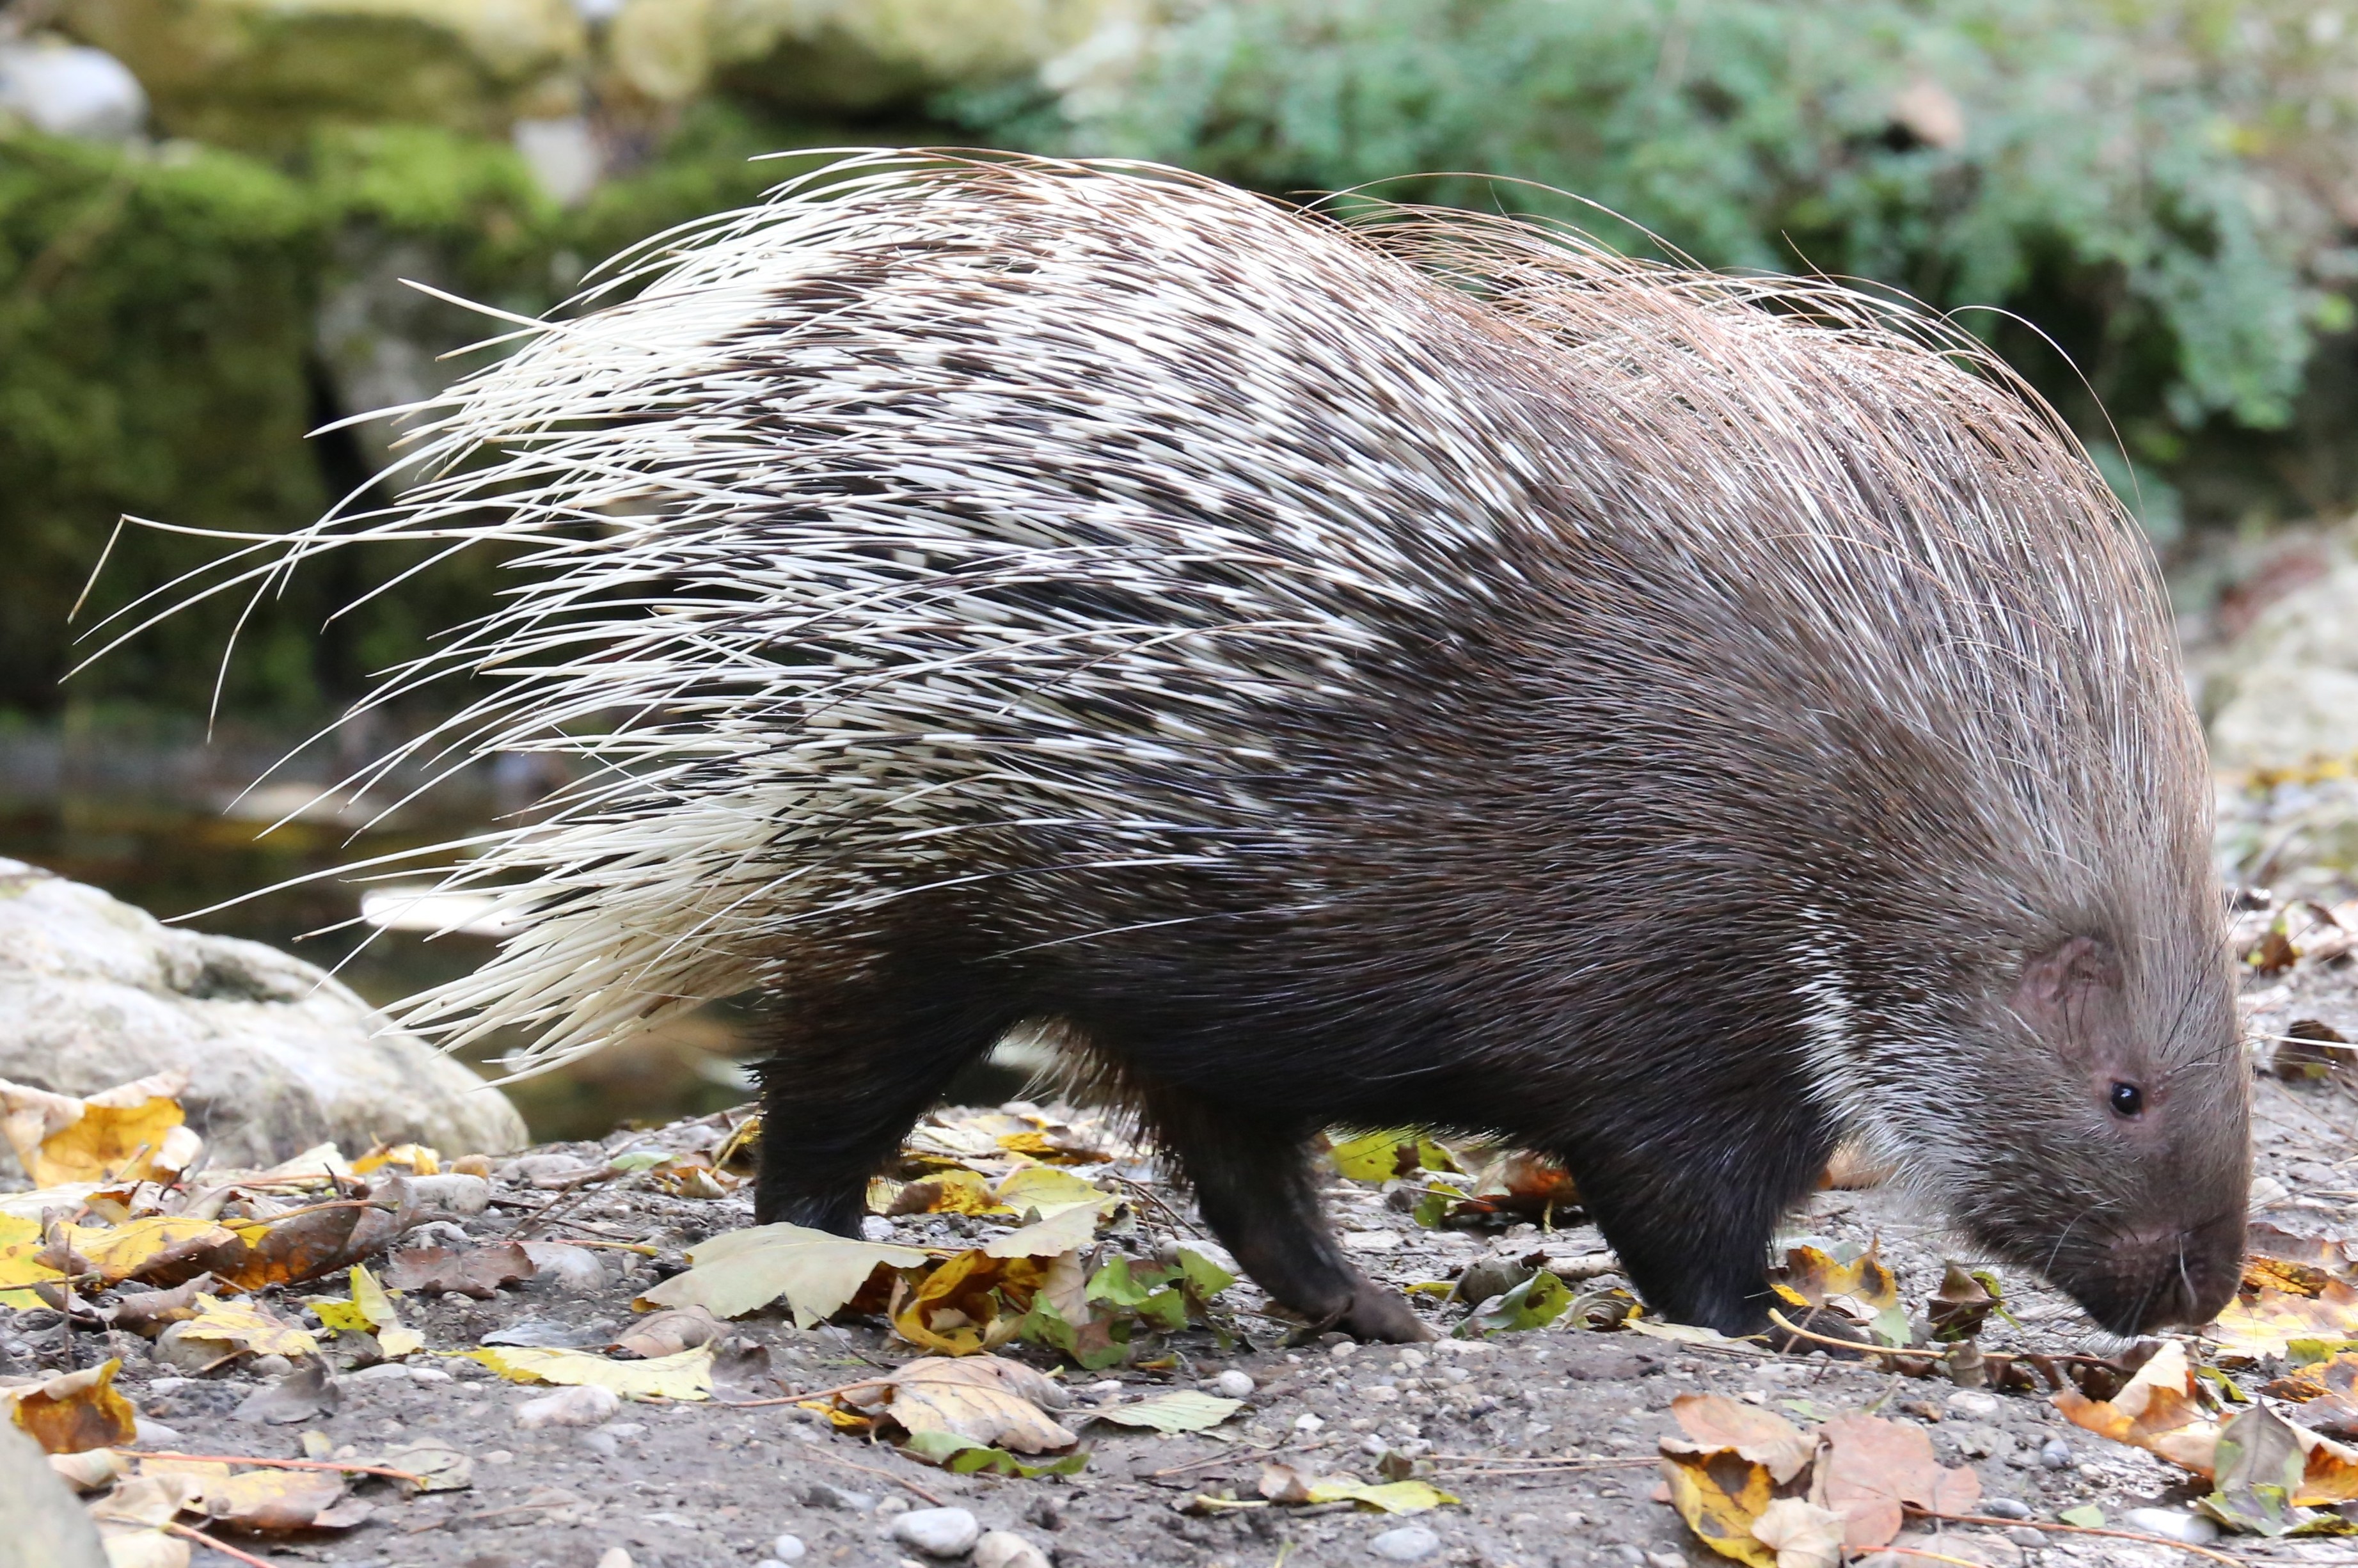 A cute porcupine with its quills raised.